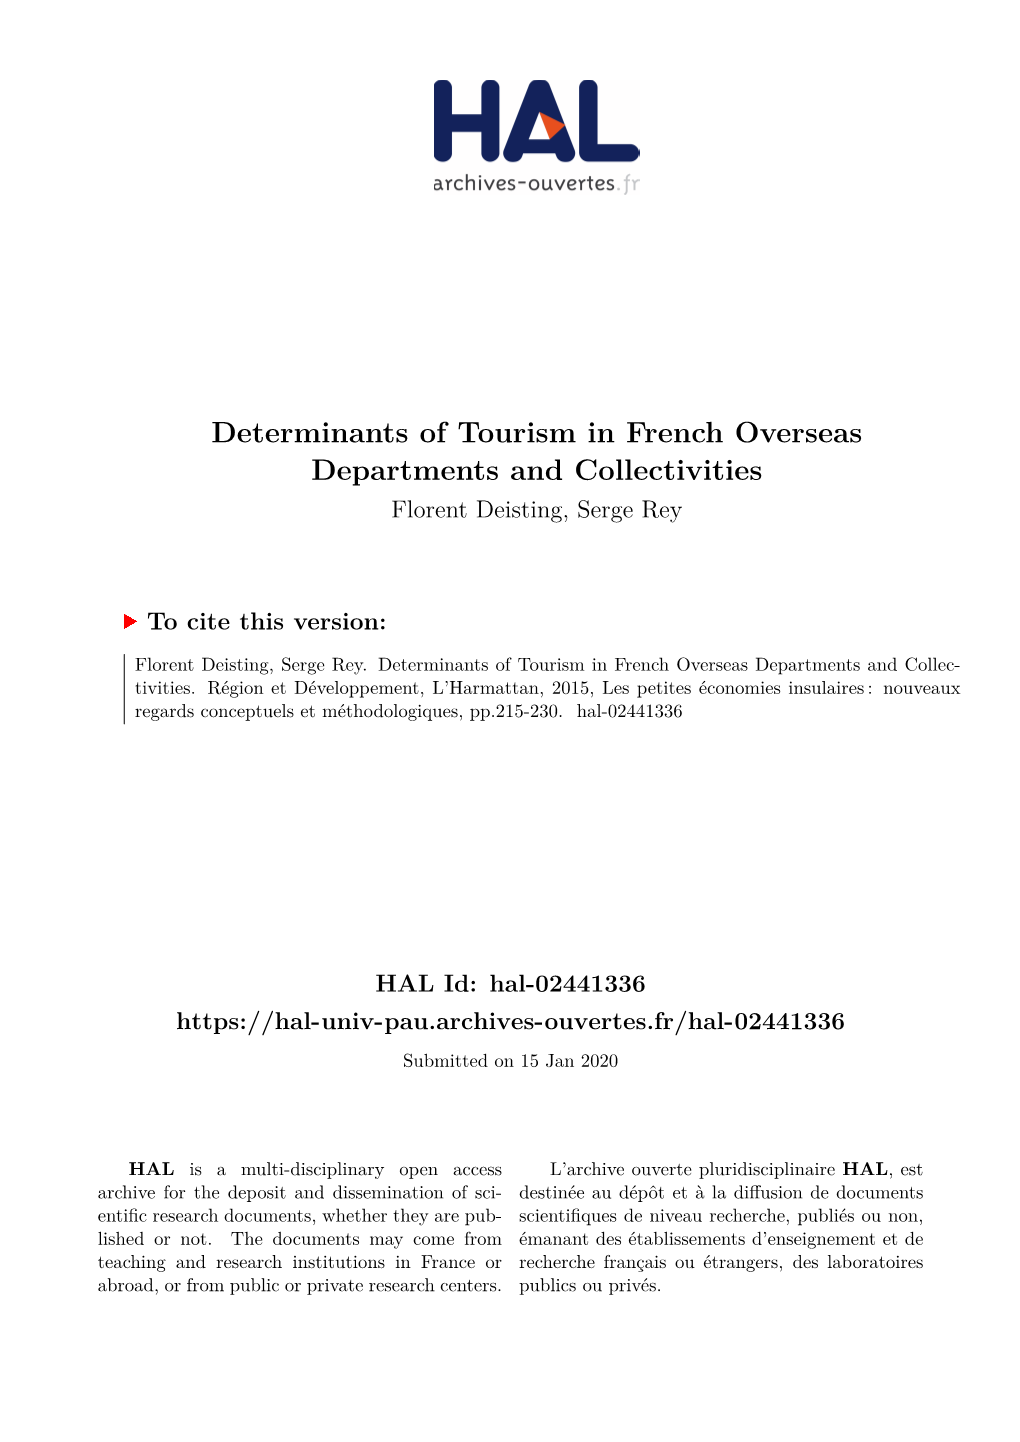 Determinants of Tourism in French Overseas Departments and Collectivities Florent Deisting, Serge Rey